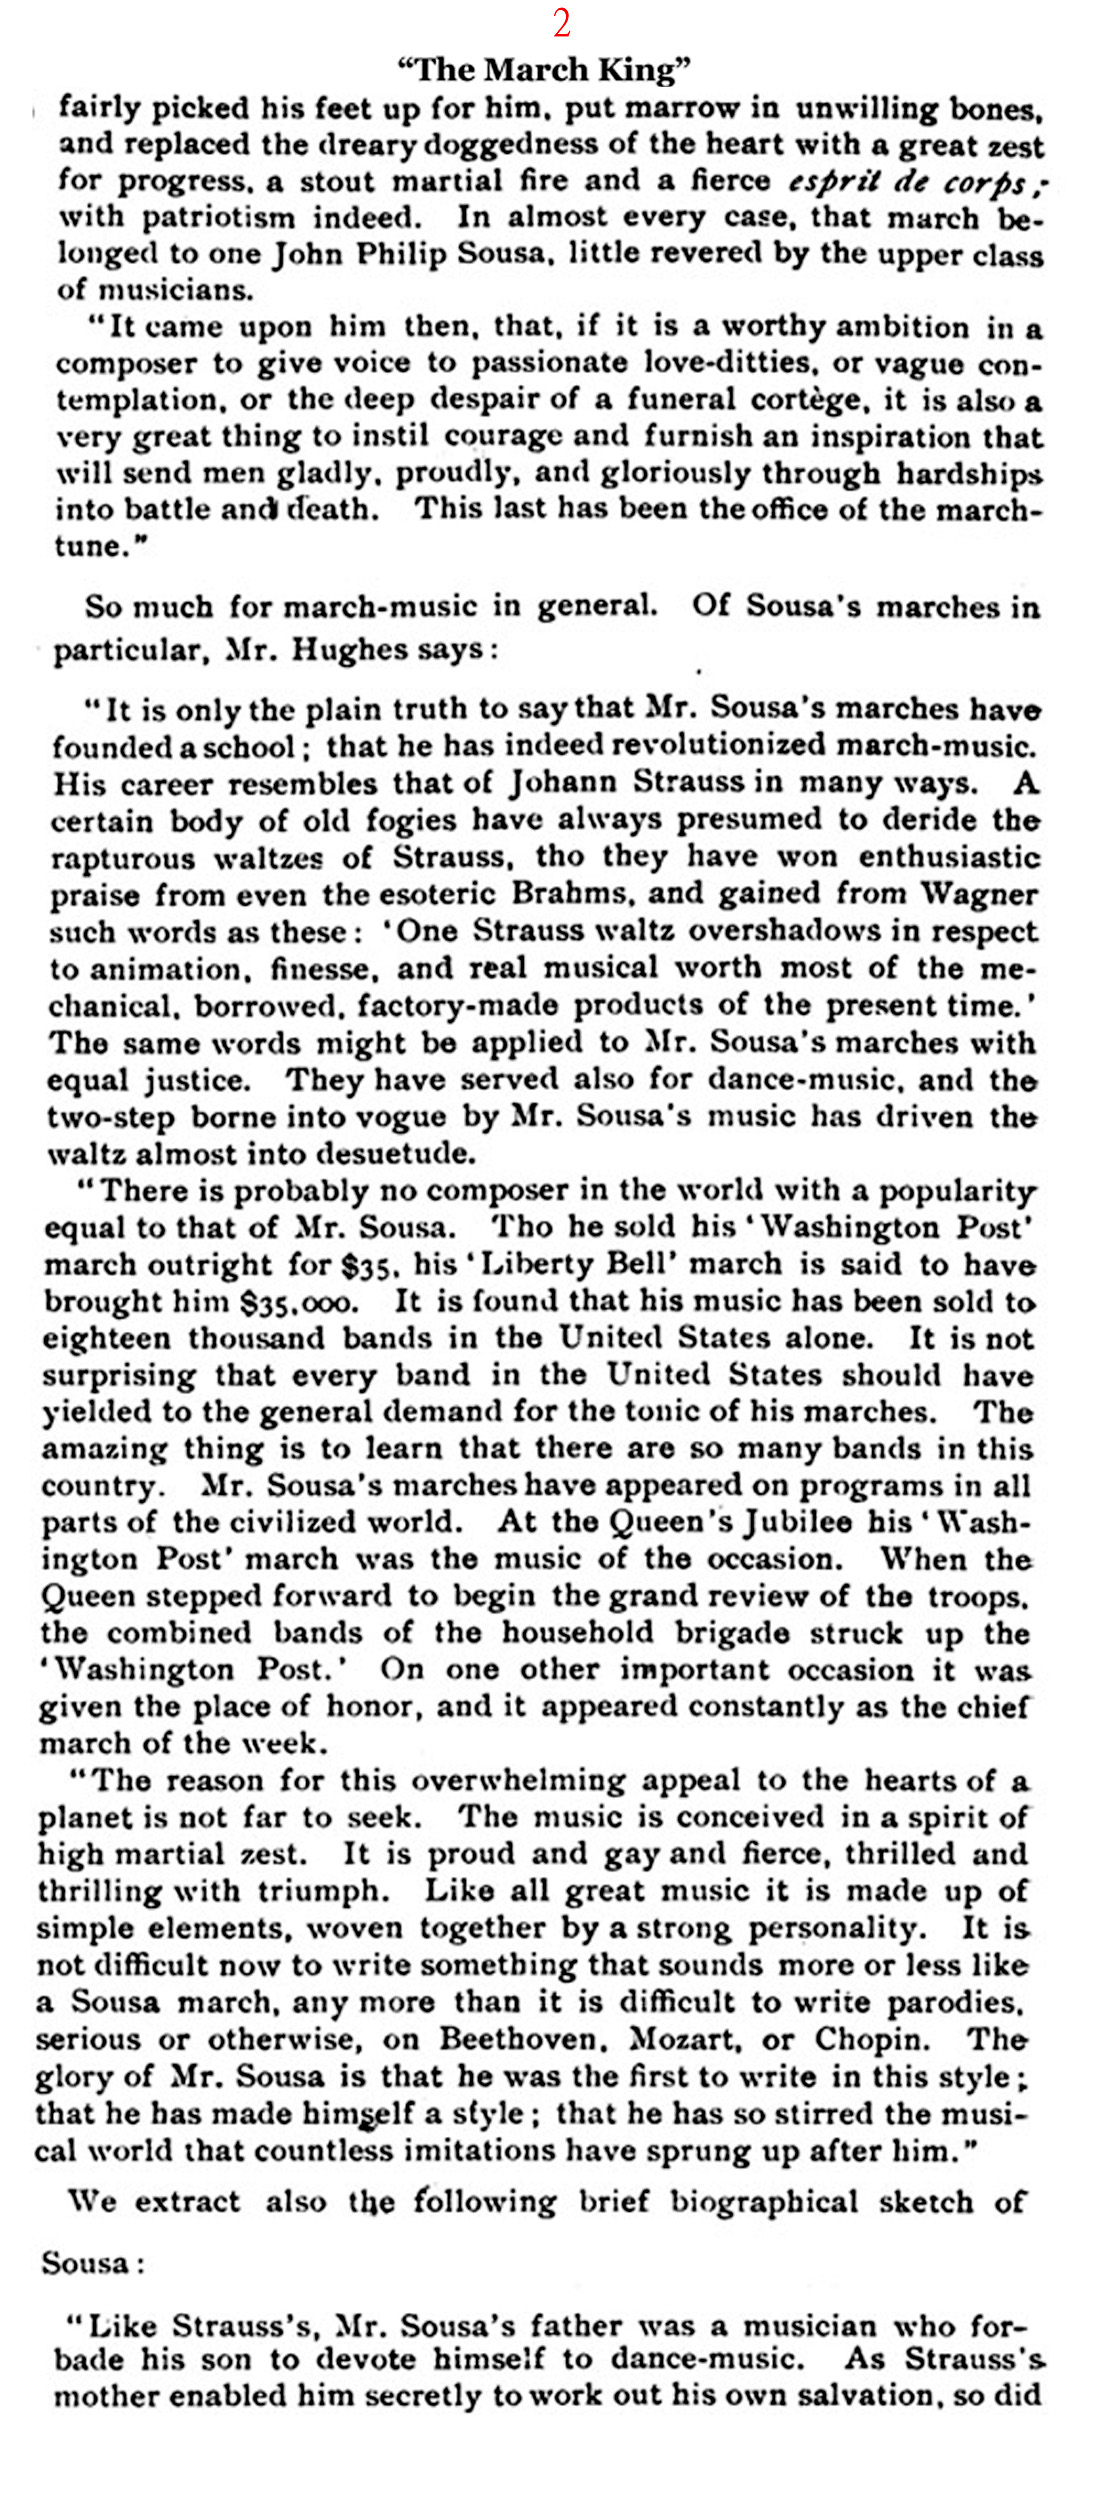 John Philip Sousa: The March King (The Literary Digest, 1897)